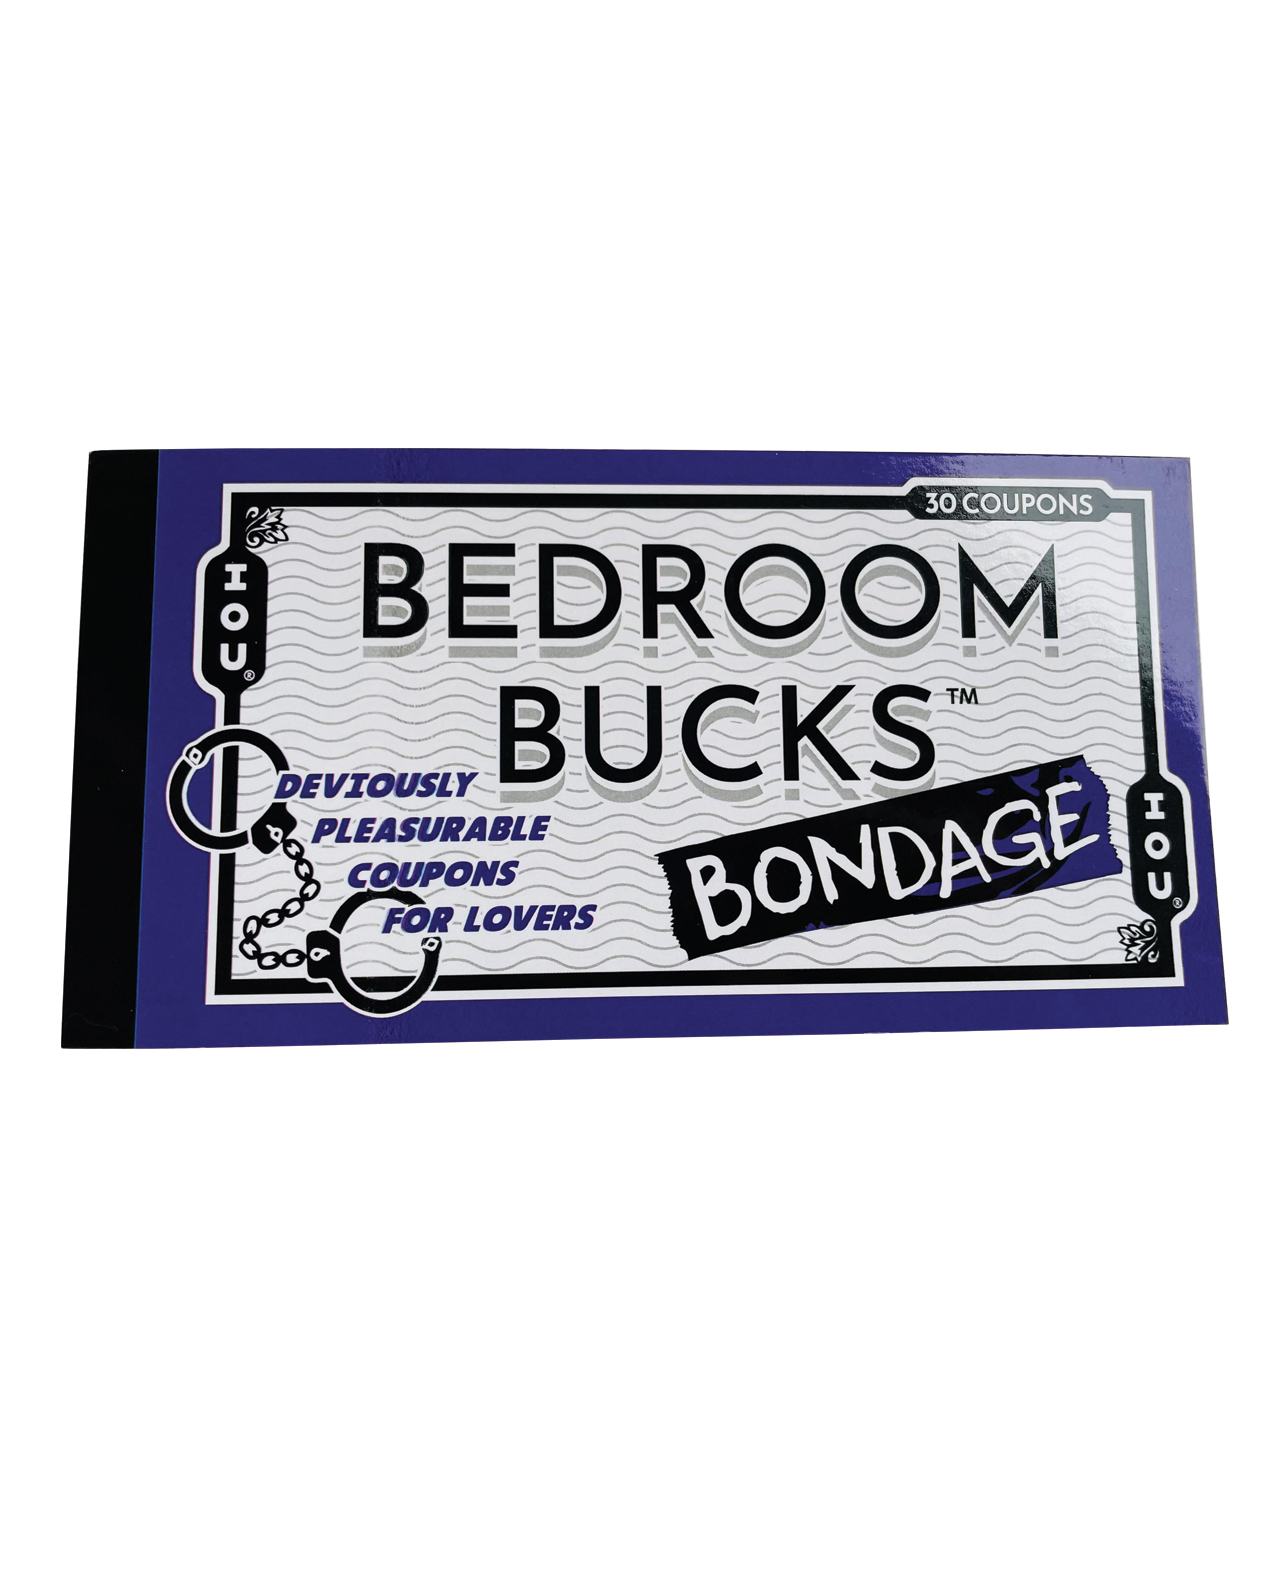 Bedroom Bondage Bucks. Deviously pleasurable coupons book for lovers.